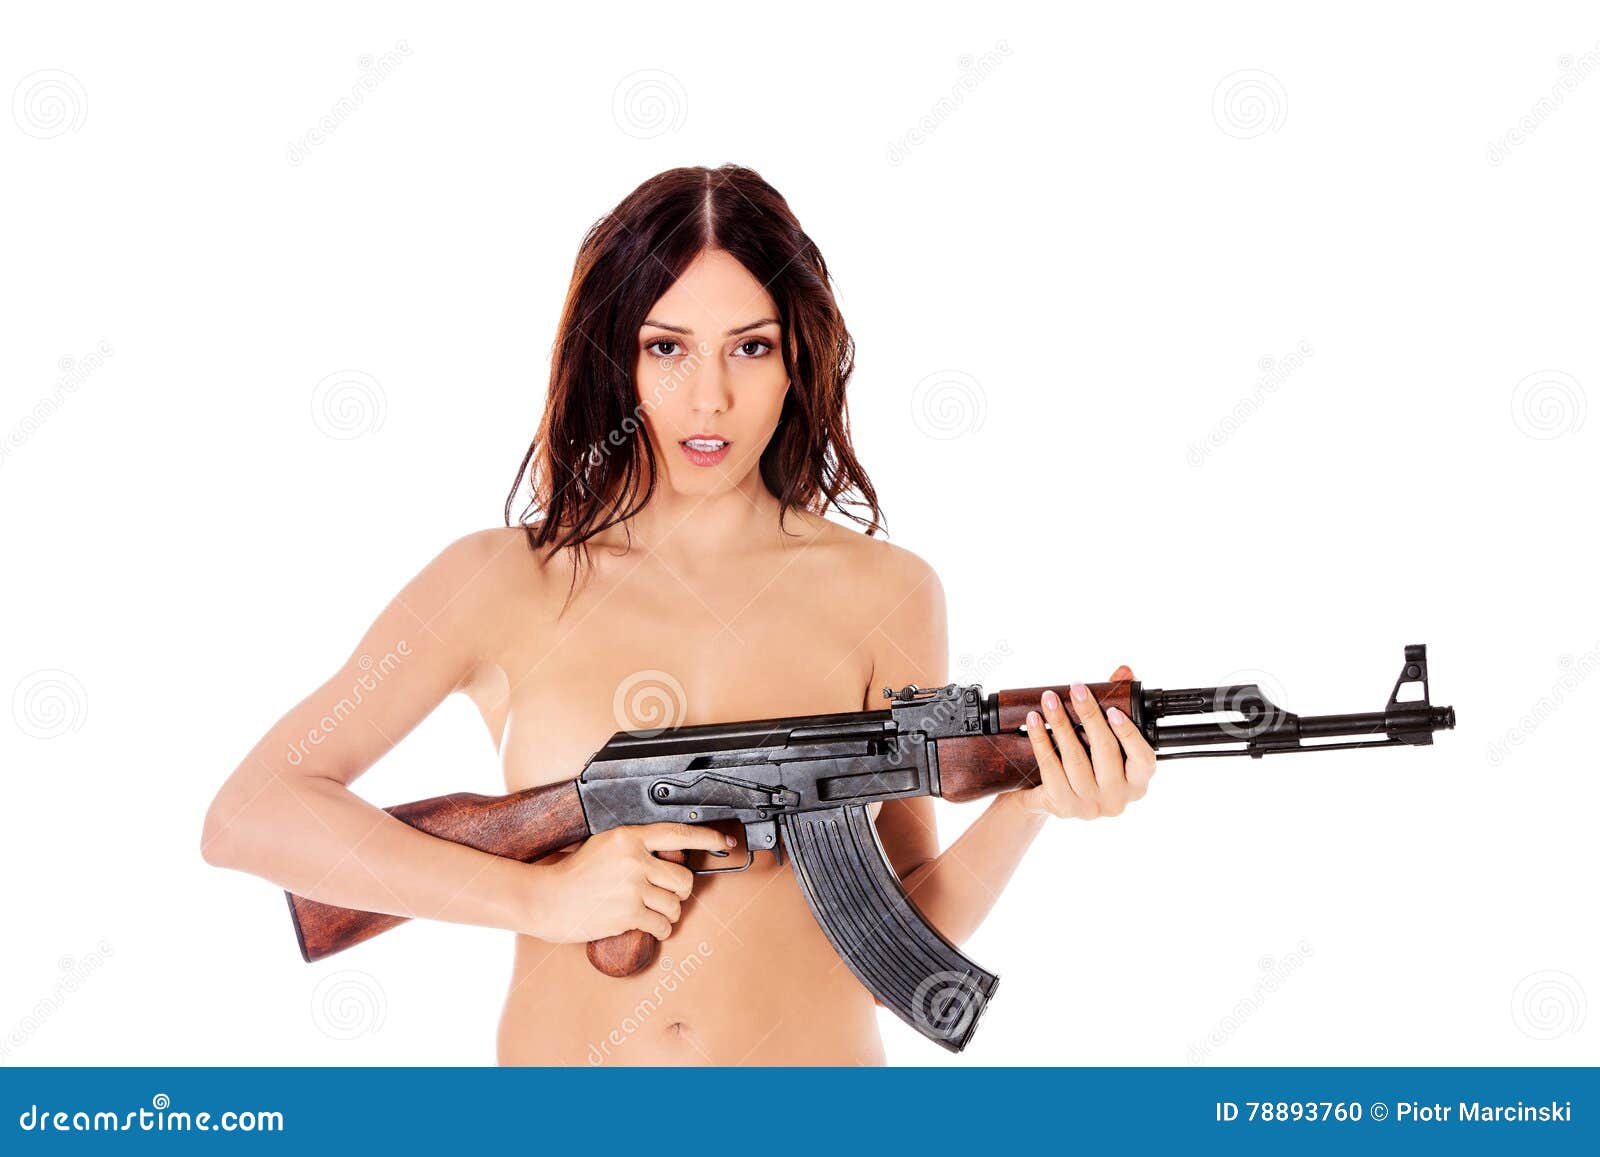 aing bae recommends nude women with weapons pic